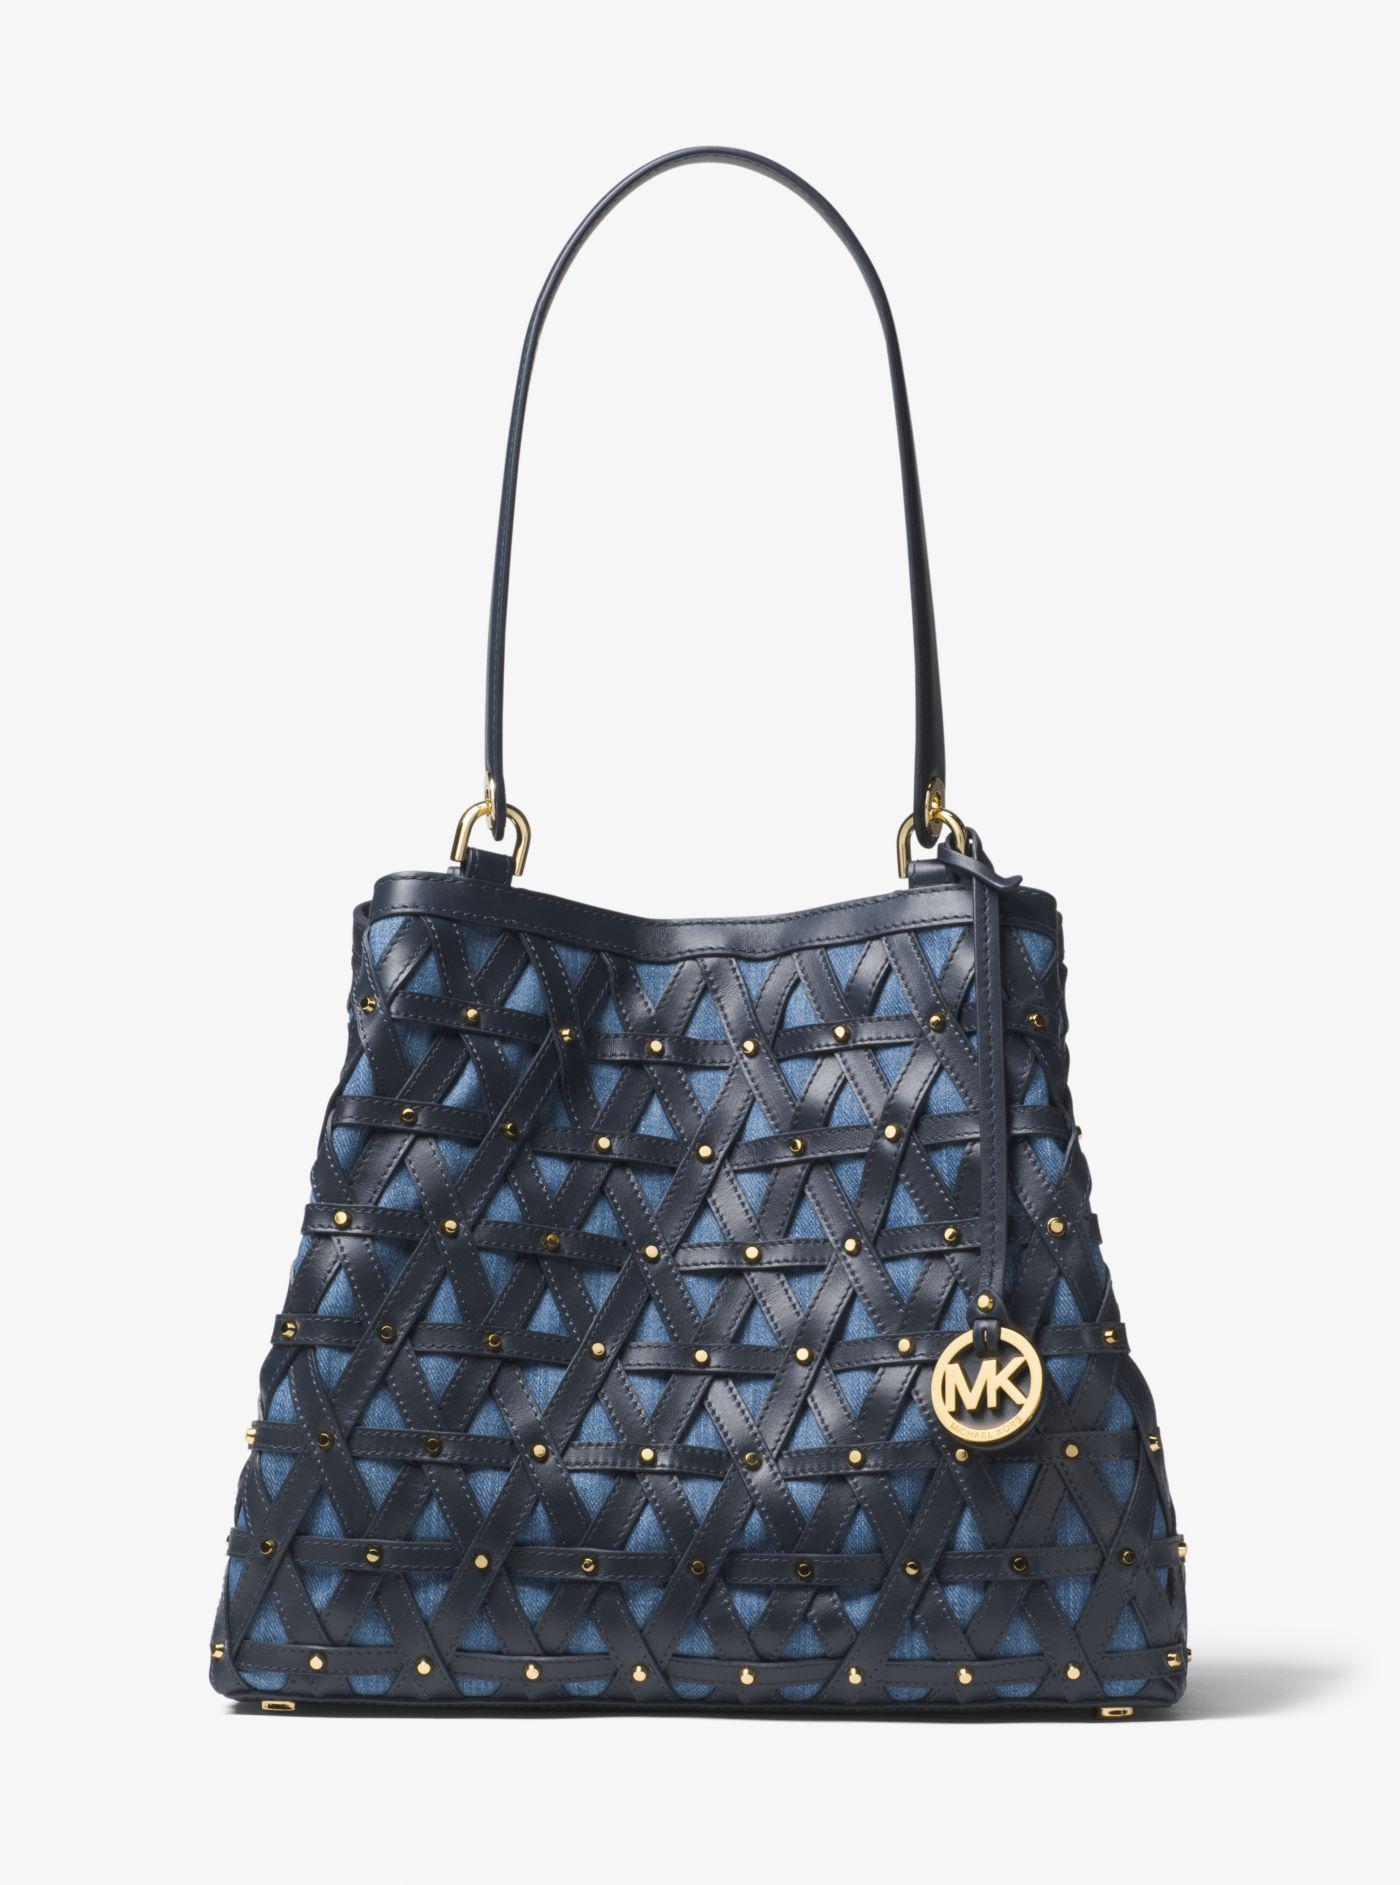 Michael Kors Brooklyn Large Leather And Denim Tote Bag in Blue - Lyst